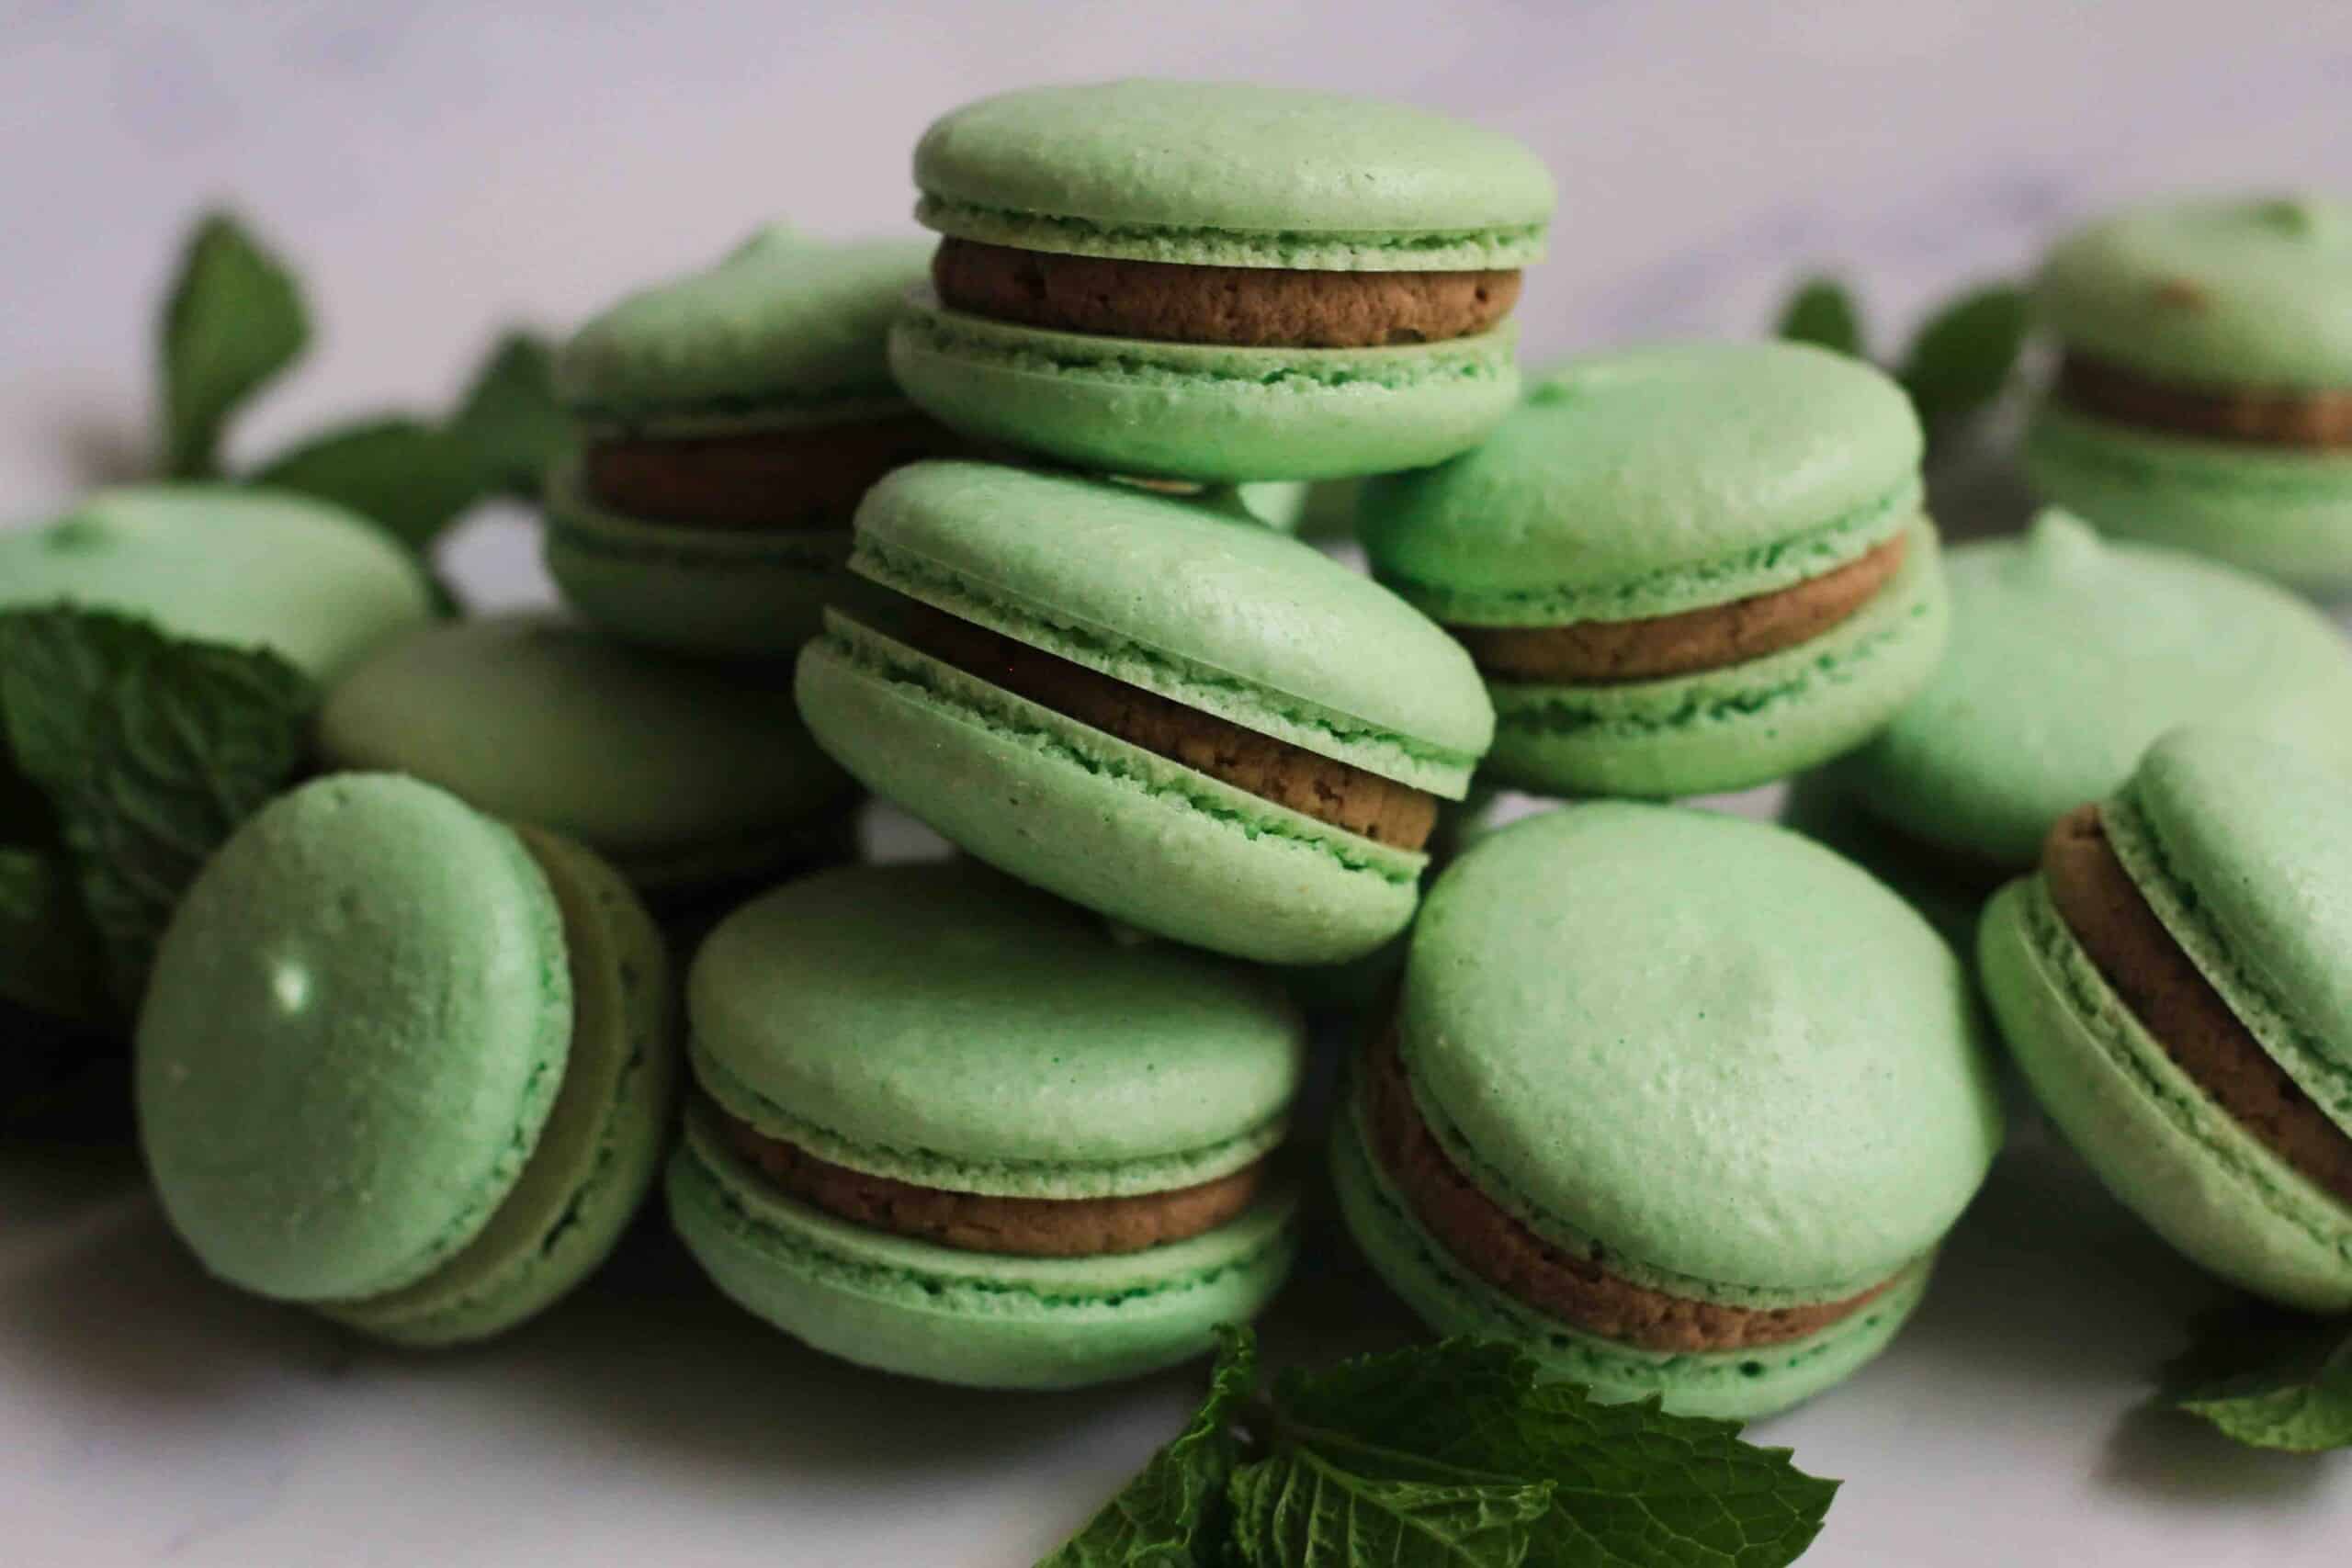 Chocolate Mint Macarons stacked on each other.